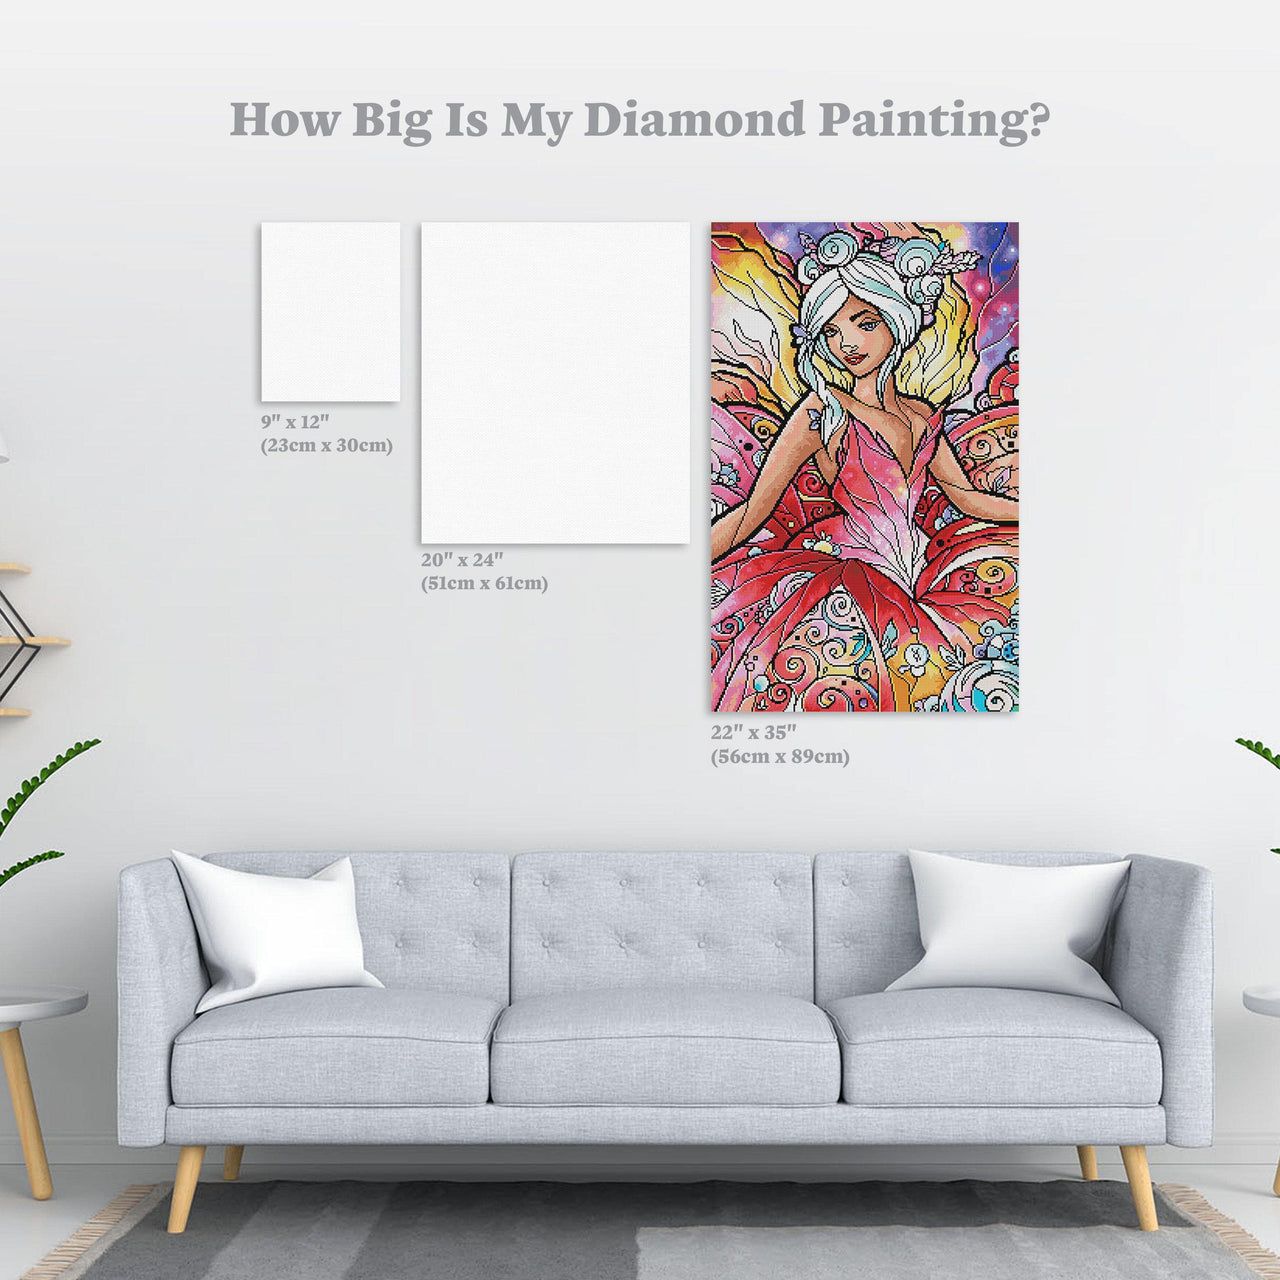 Diamond Painting The Sugar Plum Fairy 22" x 35″ (56cm x 89cm) / Round with 45 Colors including 2 ABs / 62,370